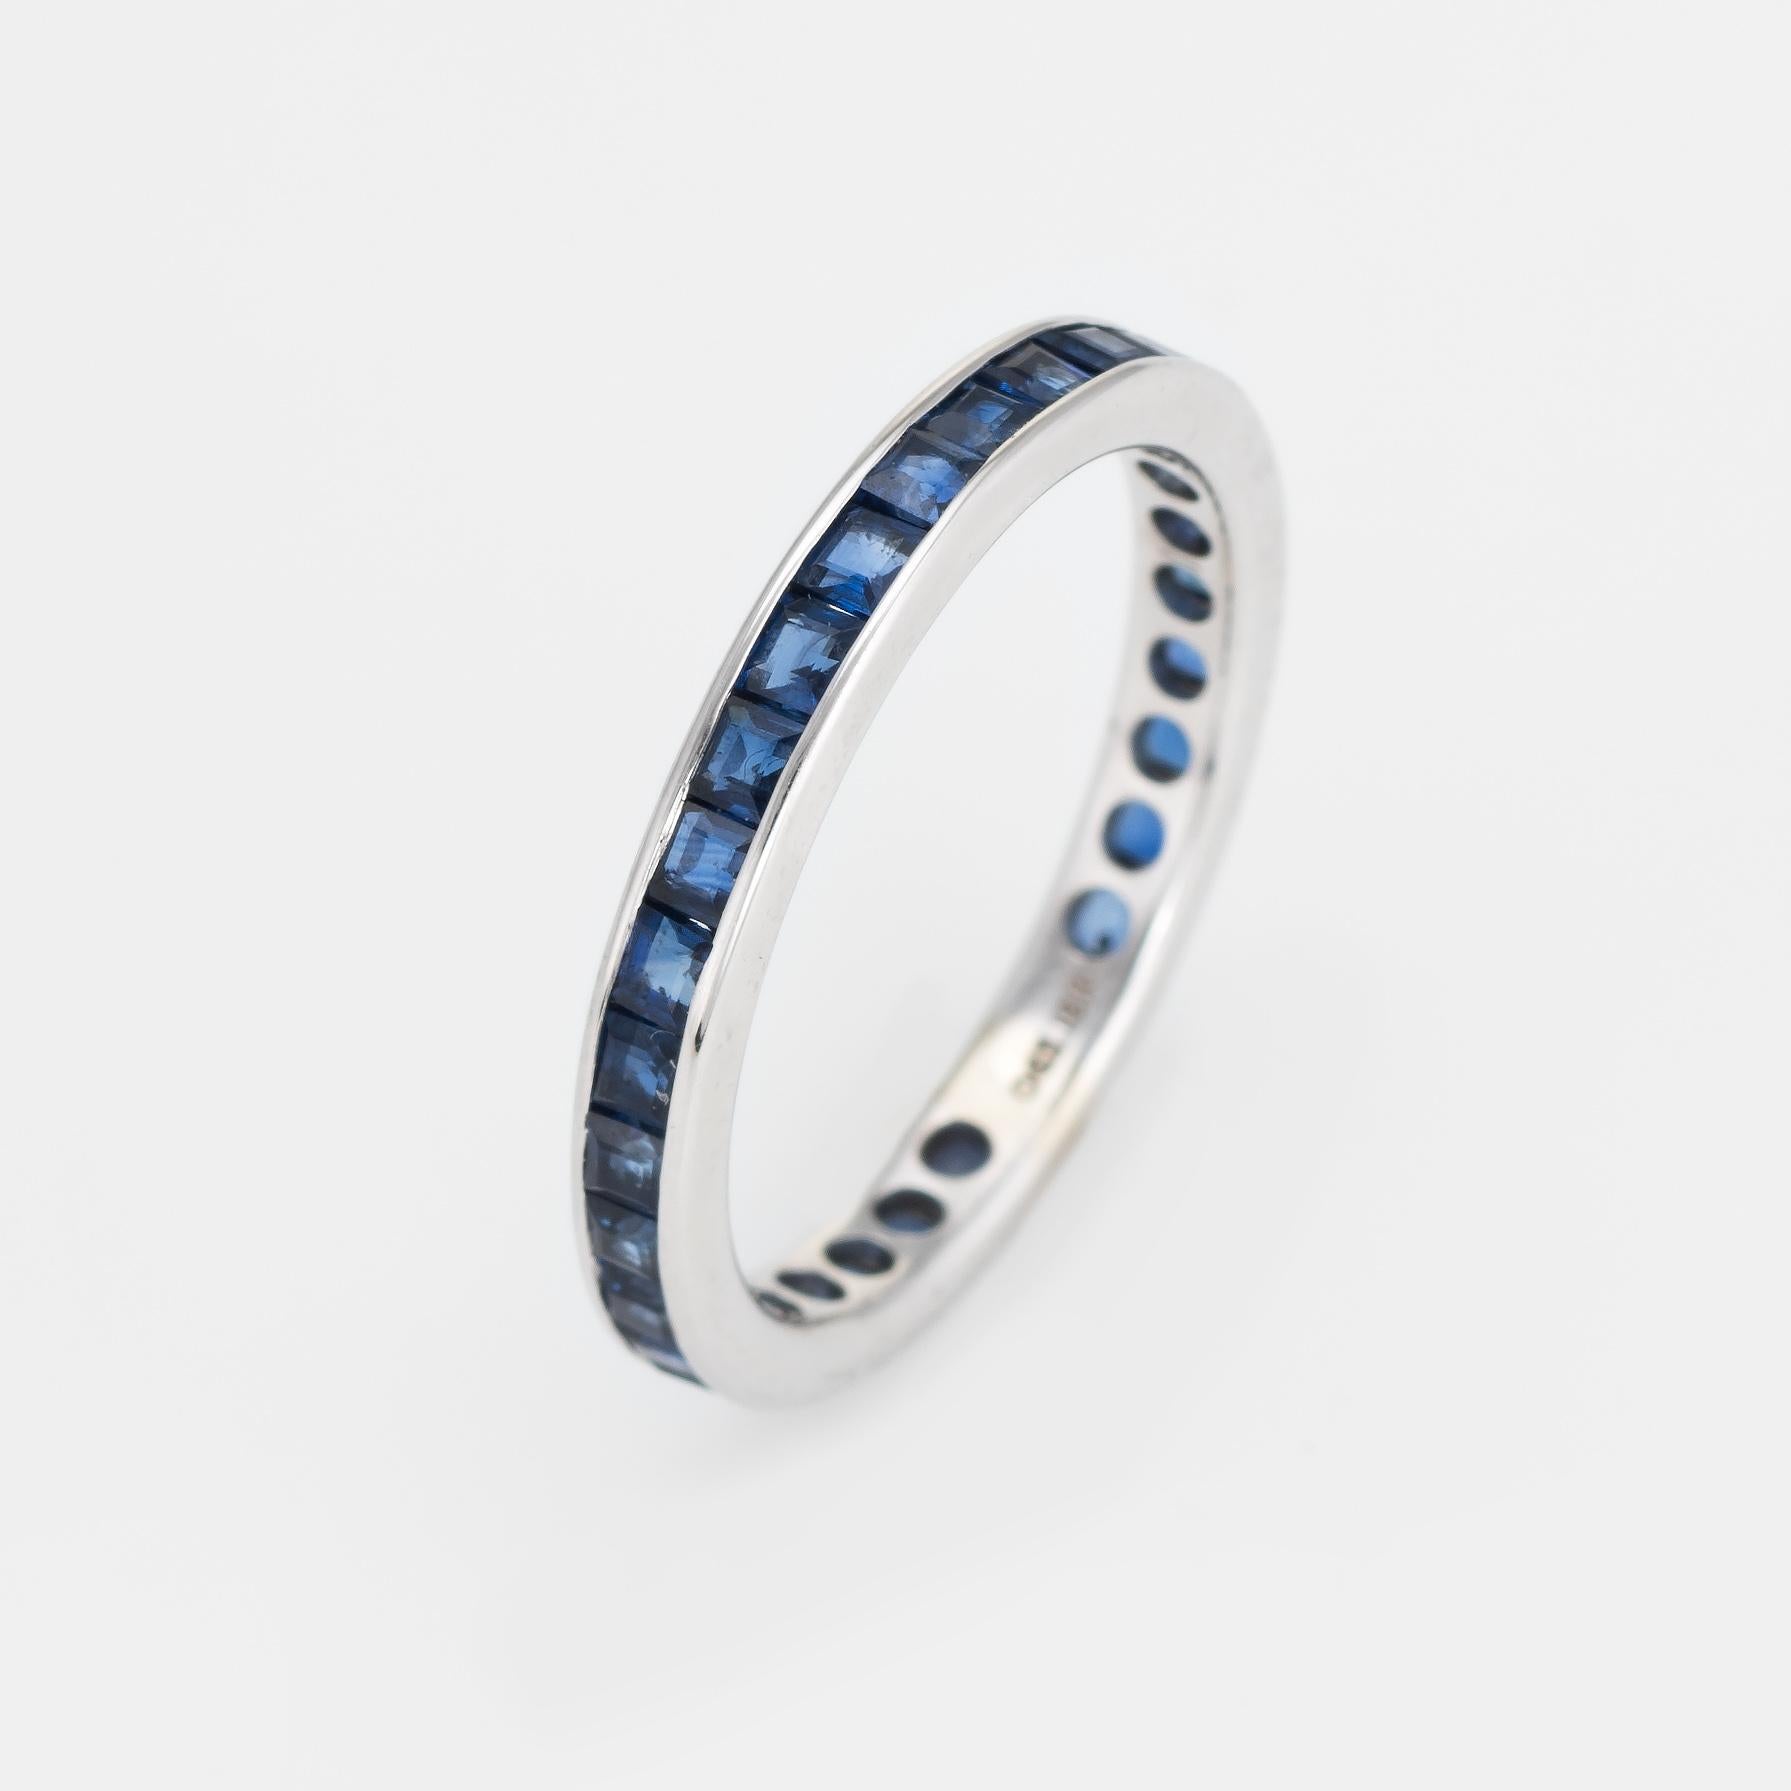 Elegant sapphire eternity ring, crafted in 18 karat white gold. 

26 square cut blue sapphires are estimated at 0.02 carats each and total an estimated 0.56 carats. The sapphires are in excellent condition and free of cracks or chips.

The ring